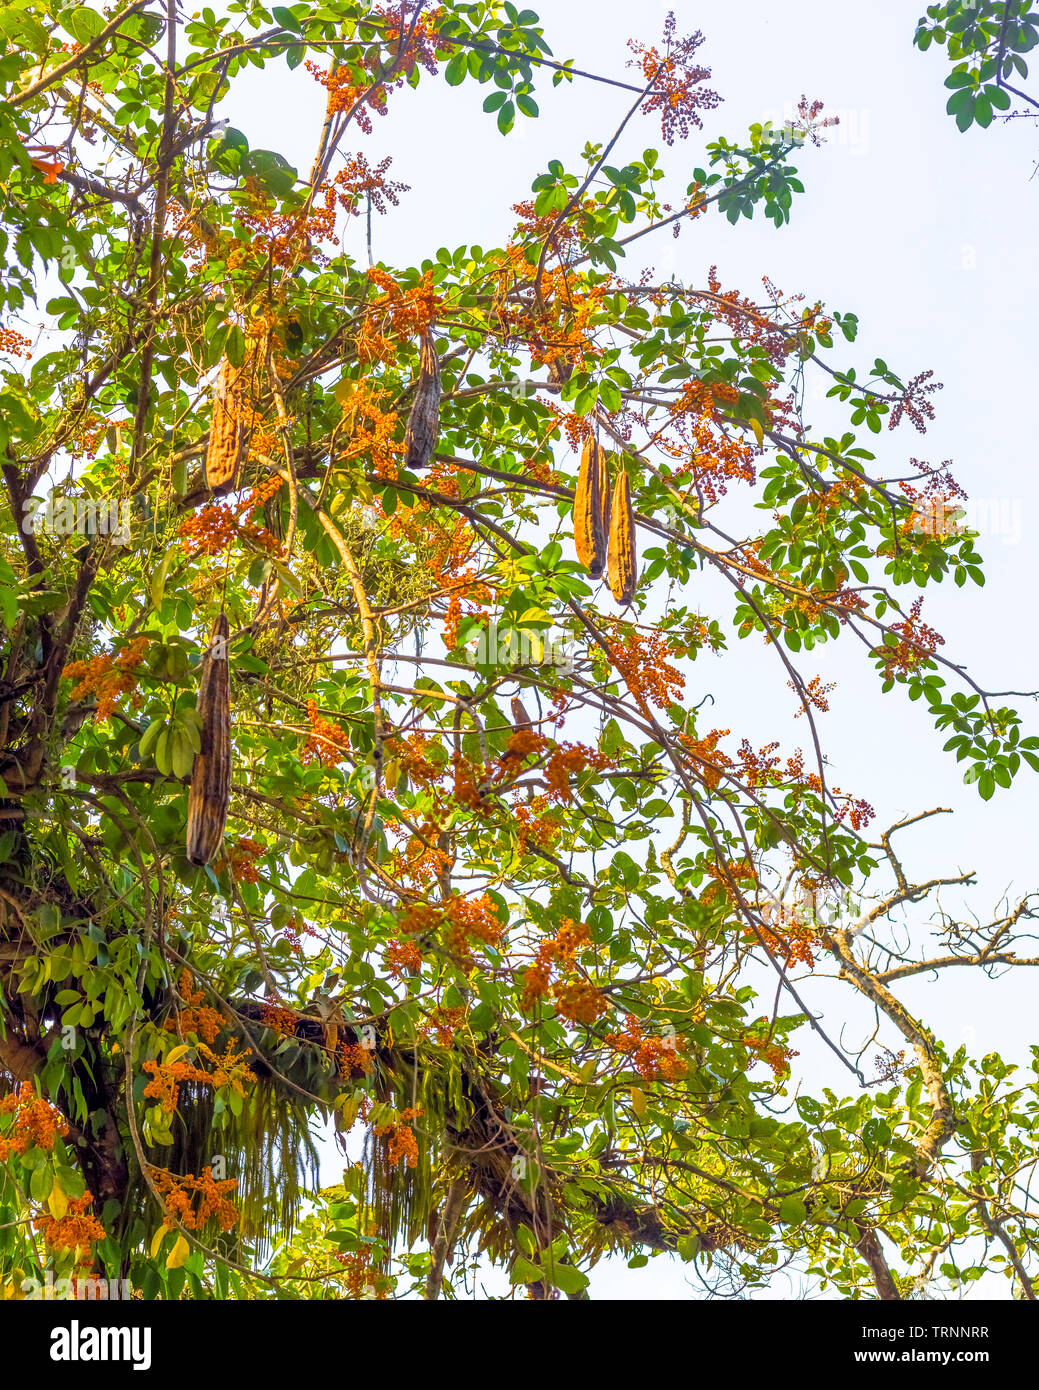 Branches Of Trees Yellow,Green,Leaves and Flowers Lakeside Pokhara Nepal Stock Photo